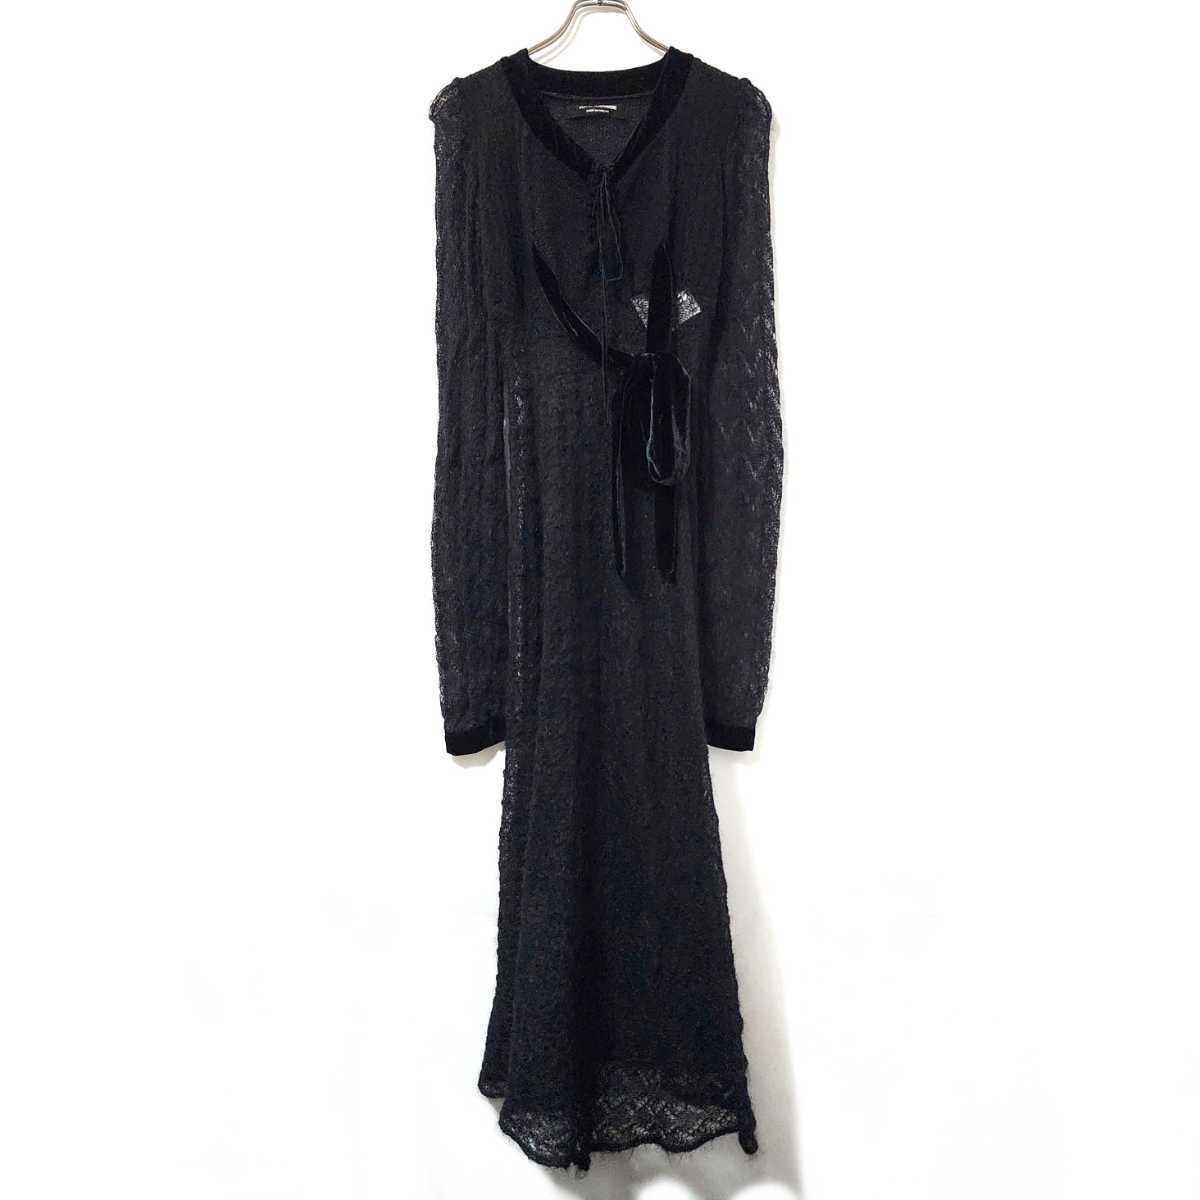 2006ss junya watanabe comme des garcons MOHAIR KNIT LONG DRESS モヘア ニット ワンピース コムデギャルソン 90s archive vintage_画像1